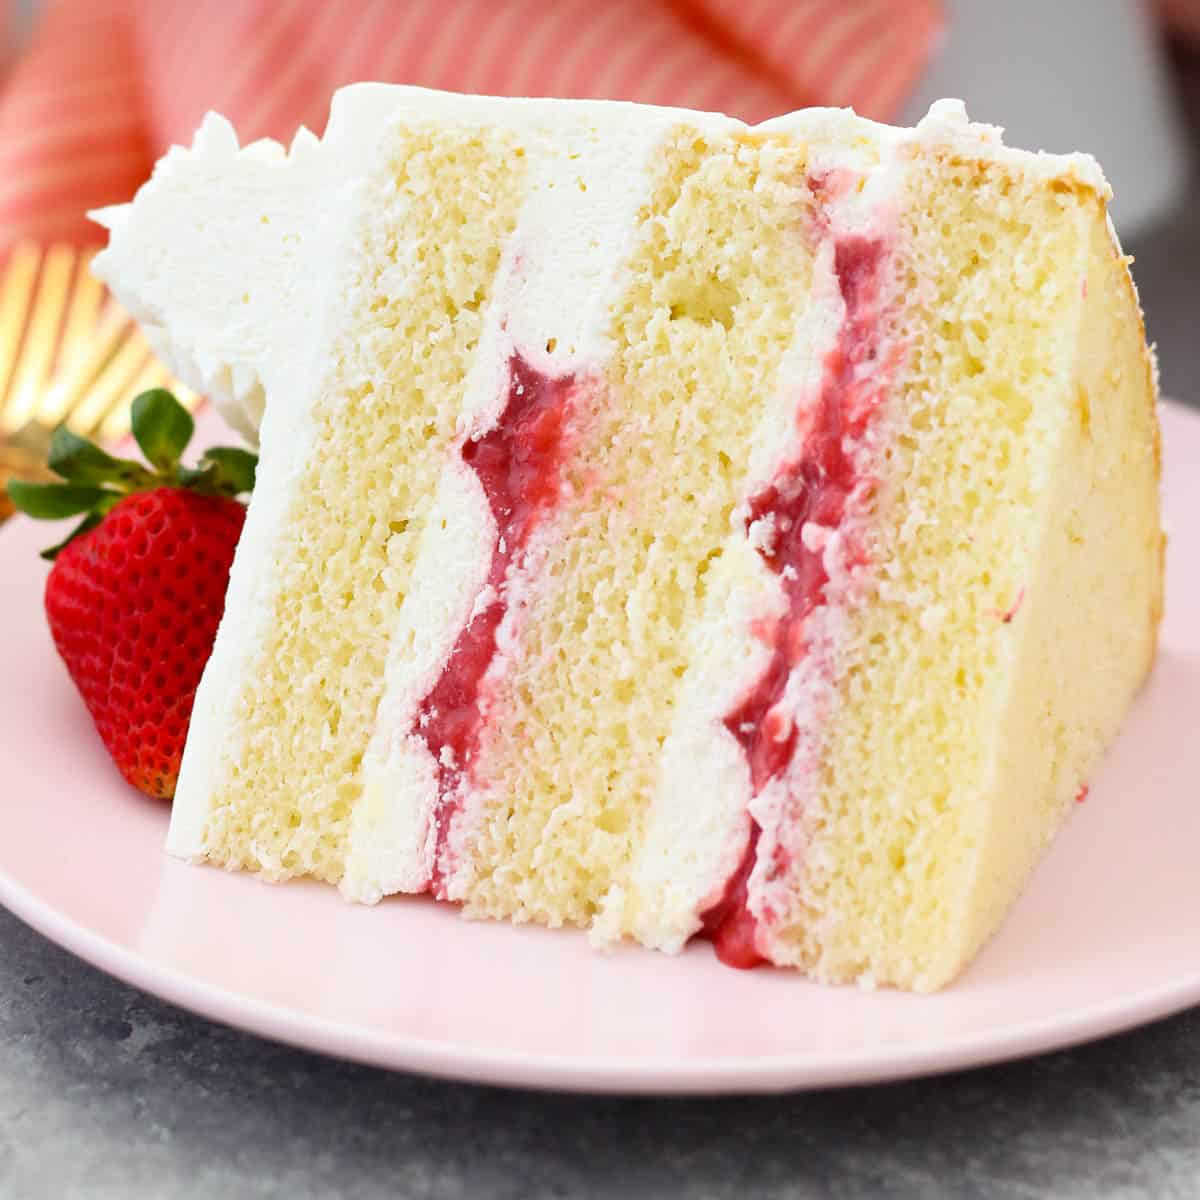 Almond Strawberry Layer Cake with Almond Buttercream Icing - Soulfully Made